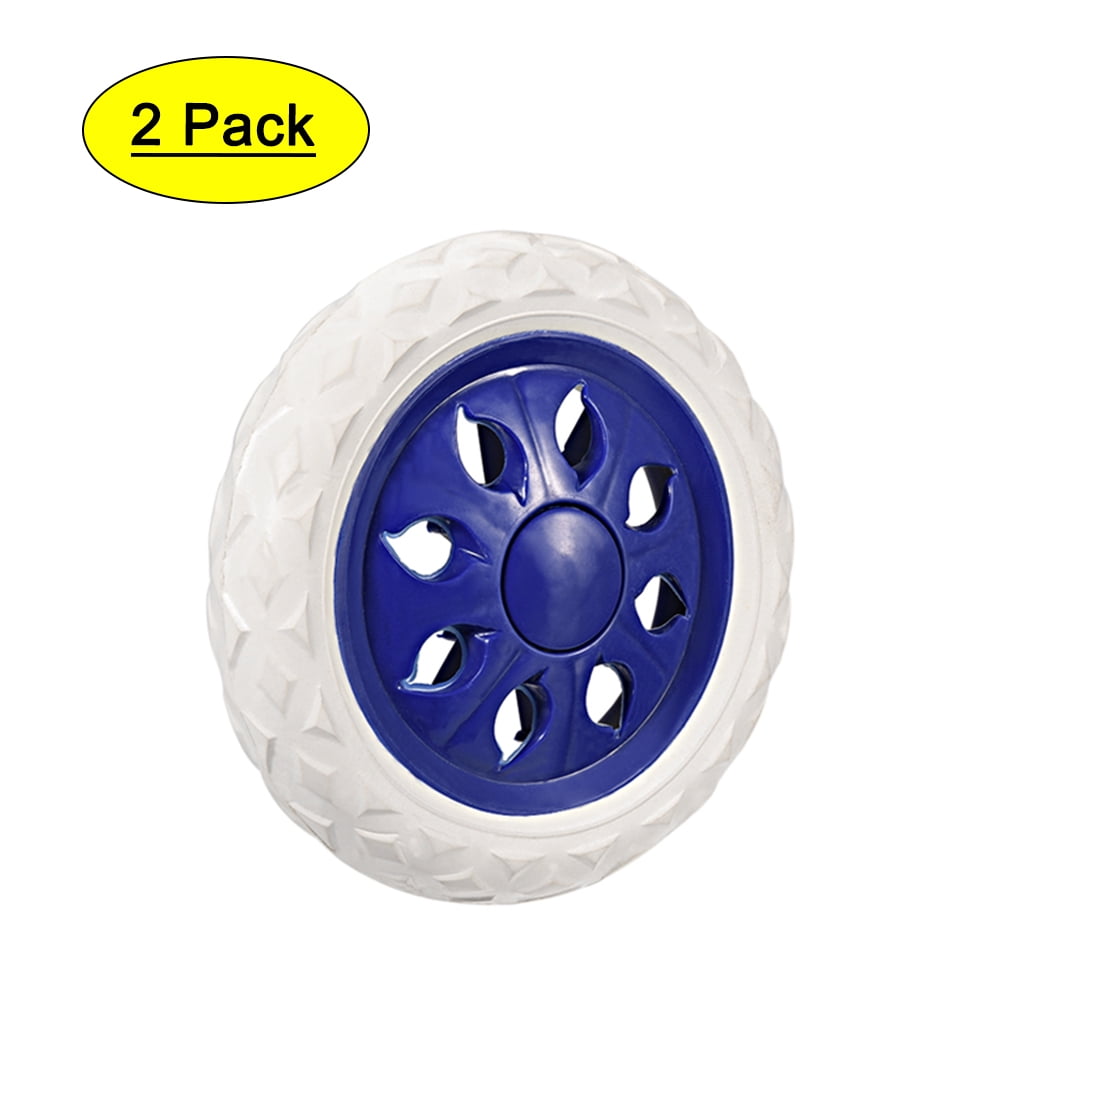 4-Pack 5/16 Bore 4 x1.25 Shopping Cart Wheel Dark Blue Polyurethane Stepped on Bore Beige Stepped Face and Full Tread Face w/Double Precision Ball Bearing 1000 lbs Total 